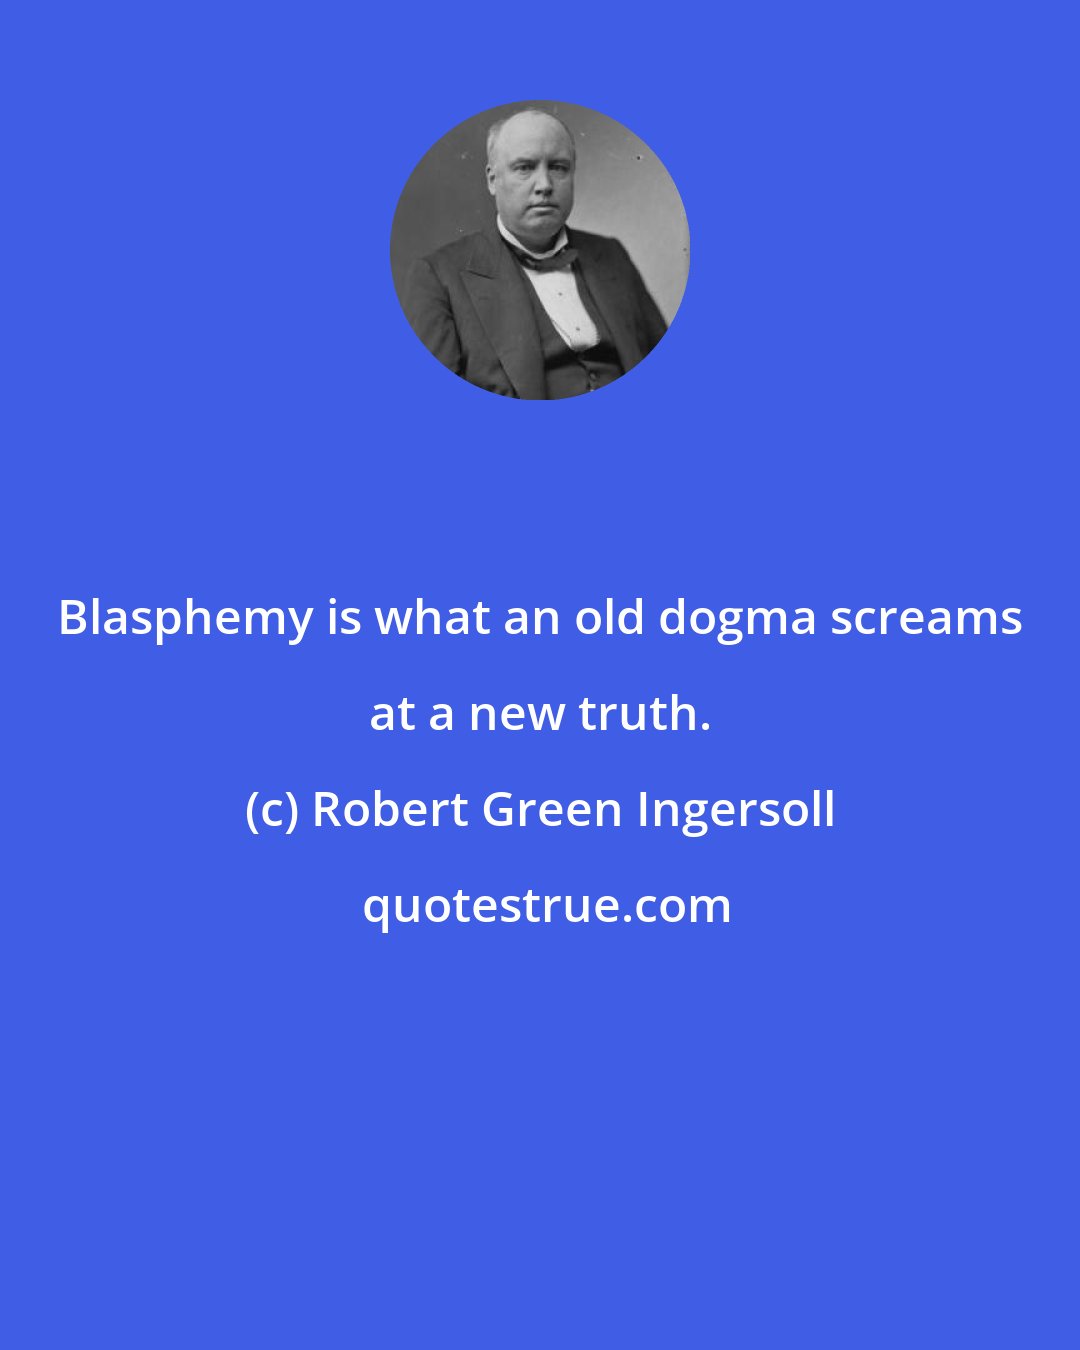 Robert Green Ingersoll: Blasphemy is what an old dogma screams at a new truth.